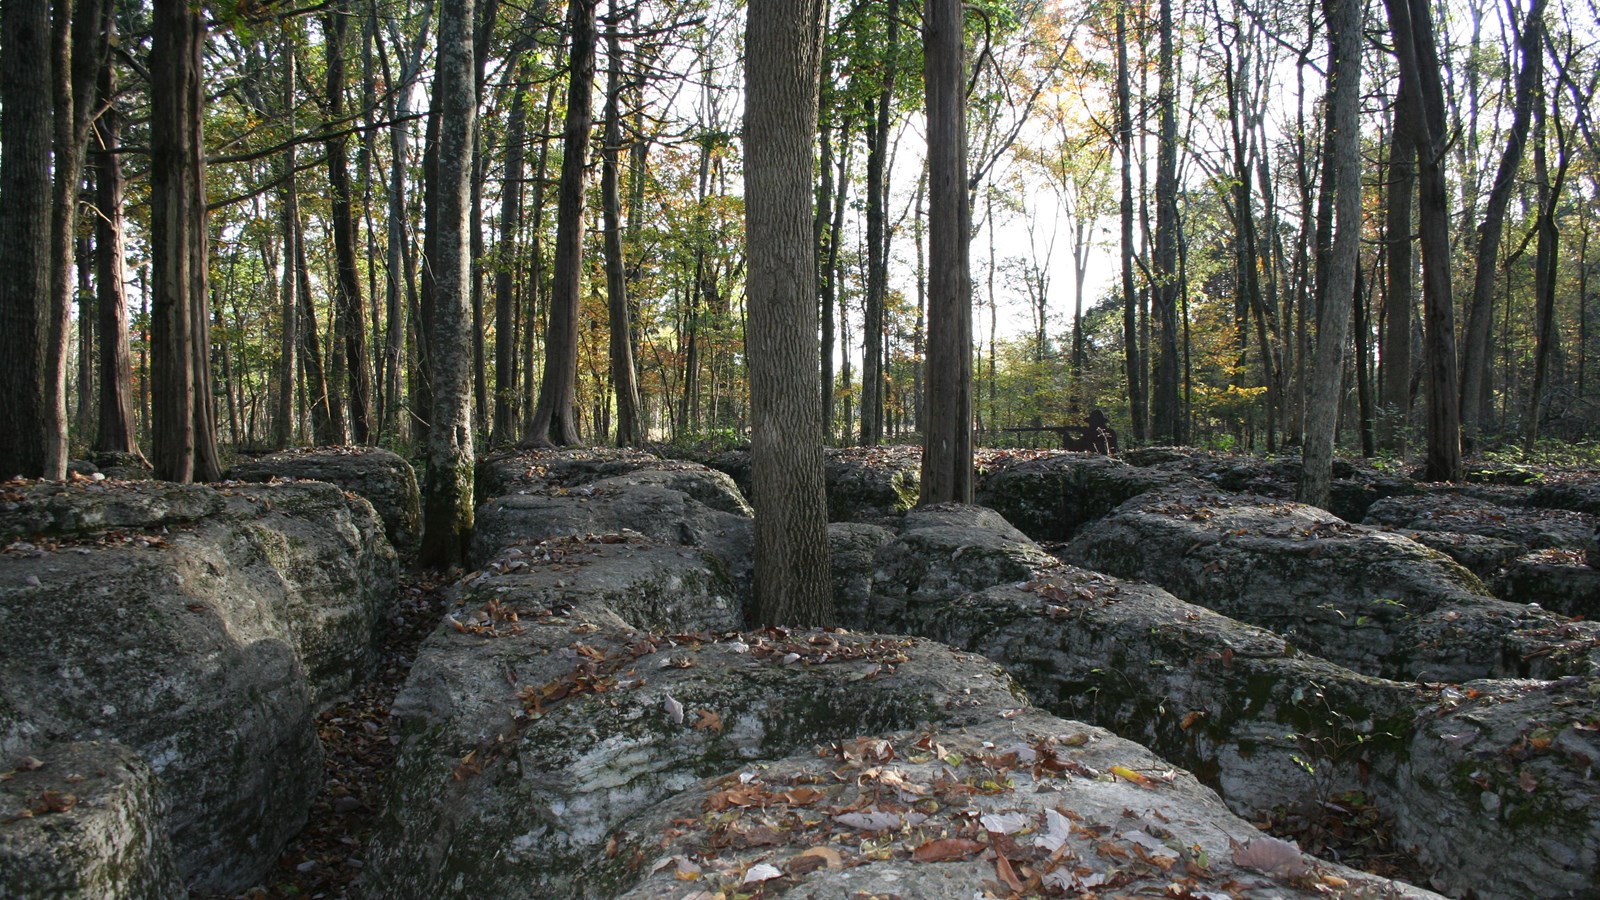 Limestone outcroppings in the midst of trees